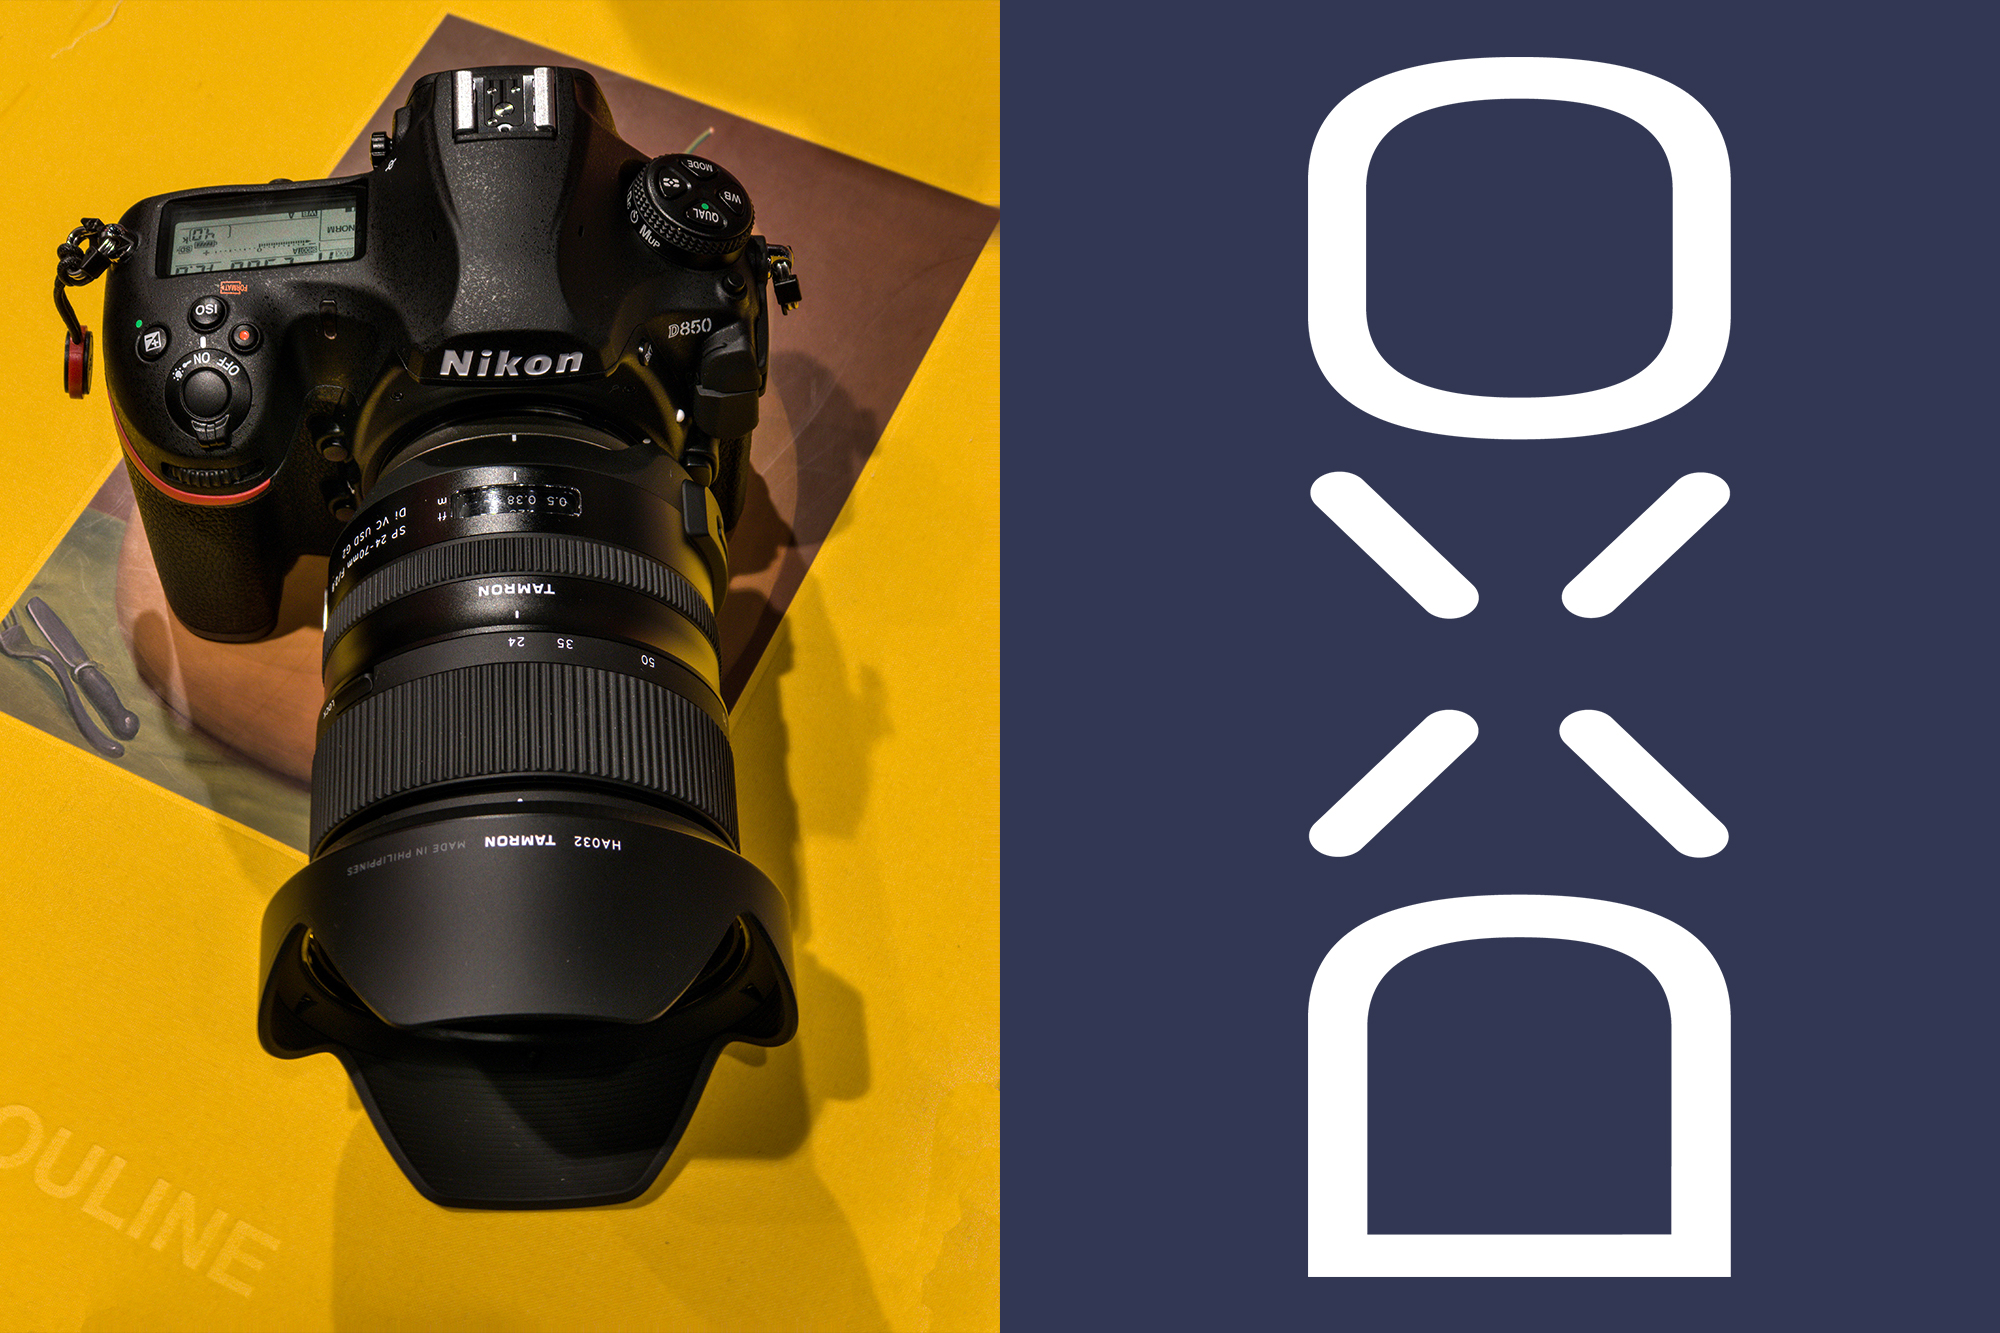 The Nikon D850 Scores 100 on DXO | Here Are A Few Things You Should